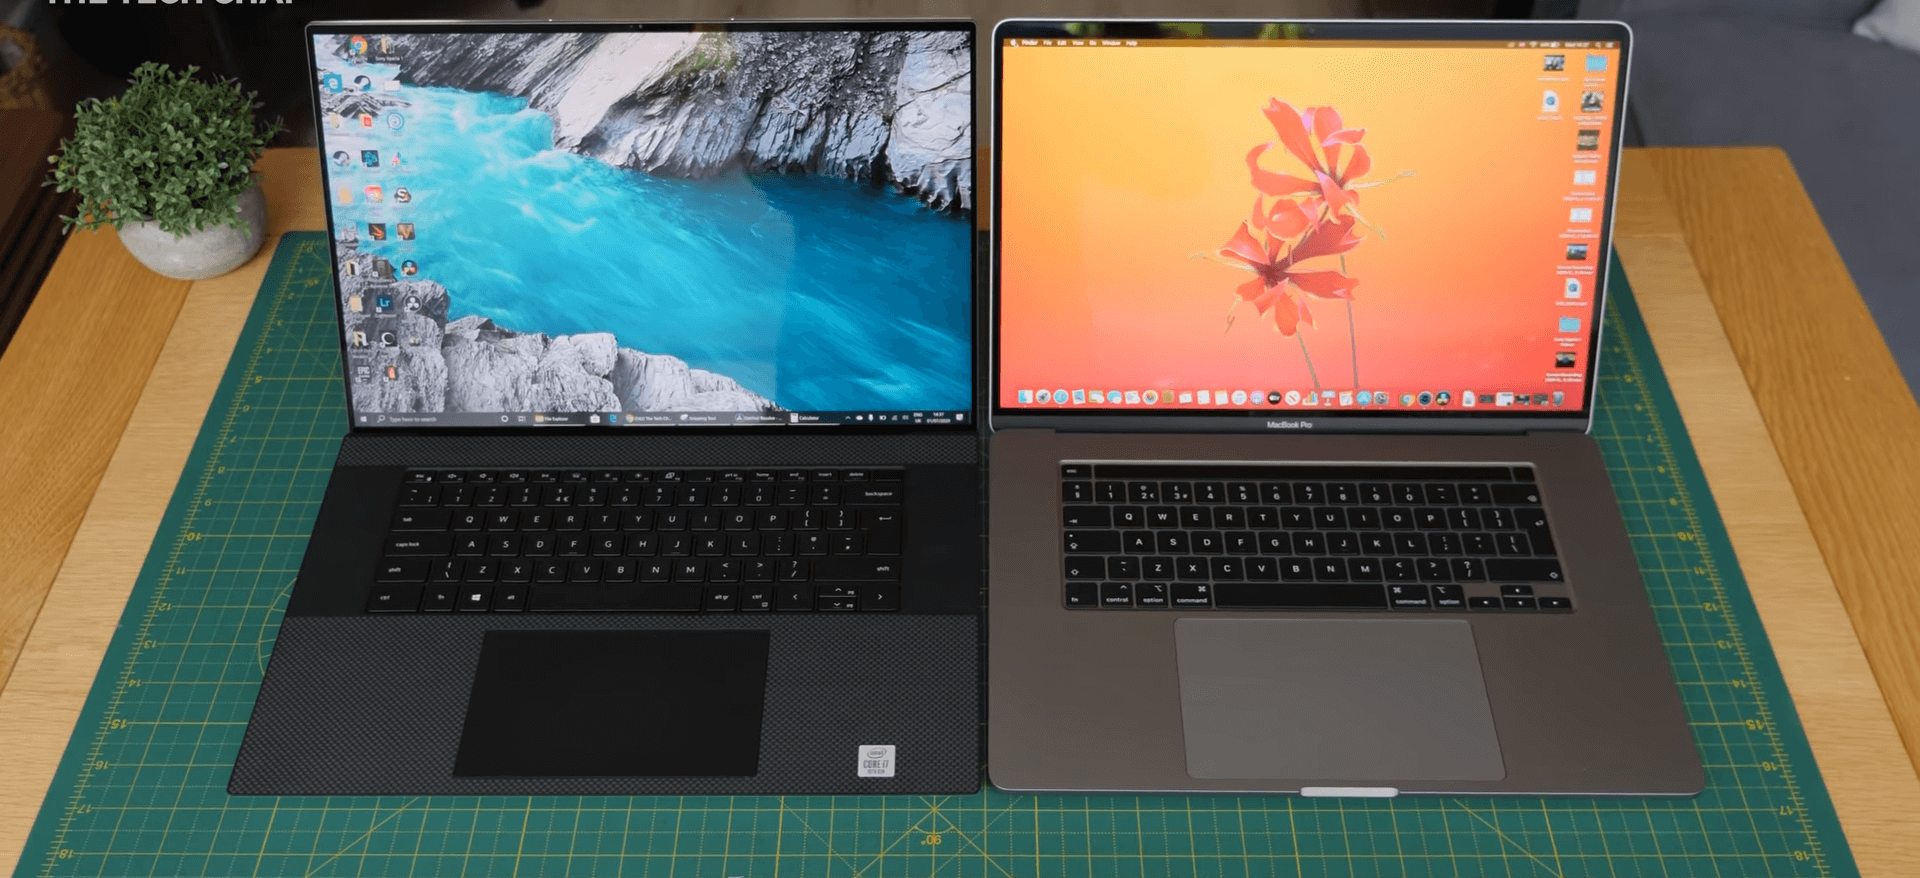 Dell XPS 17 (9700) vs Apple Macbook Pro 16: Which One You Should Choose?